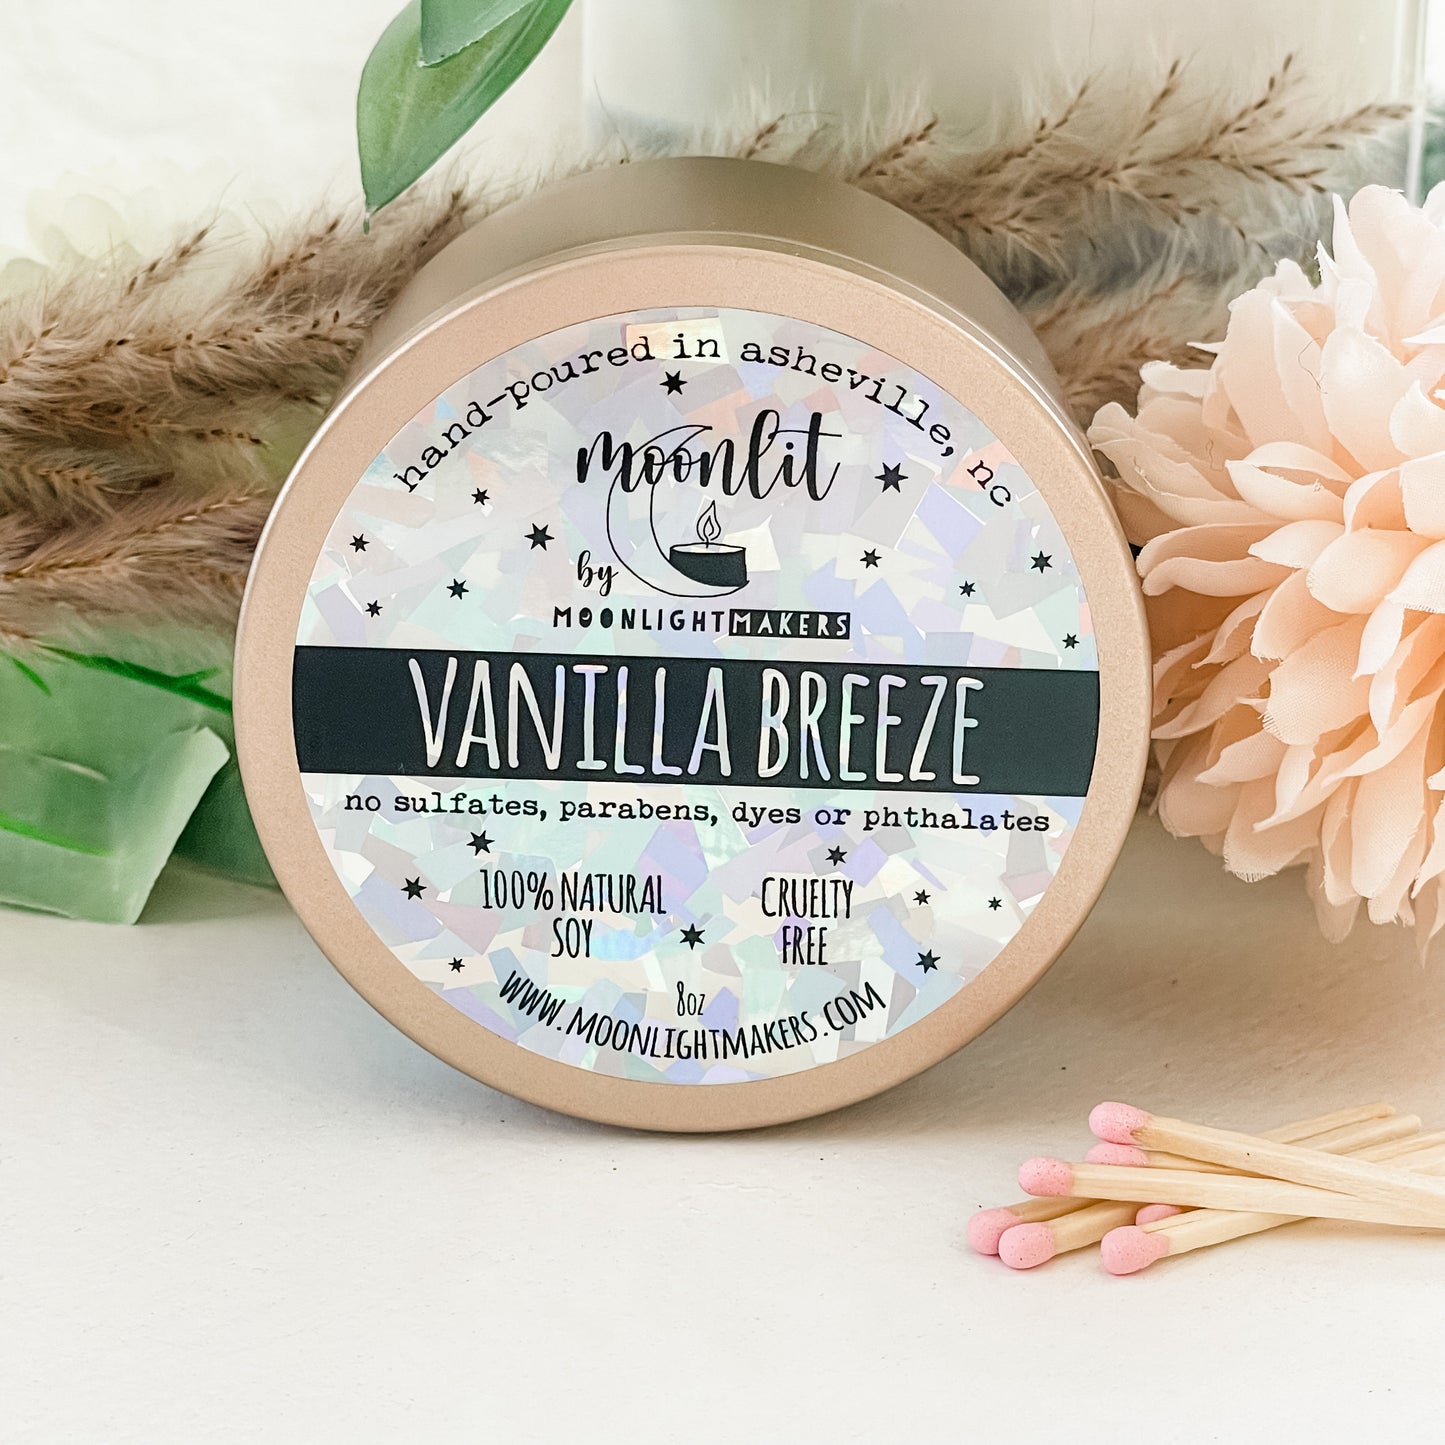 Smells Like Retirement - 8oz Rose Gold Candle - Vanilla Breeze - 100% Natural Soy Wax